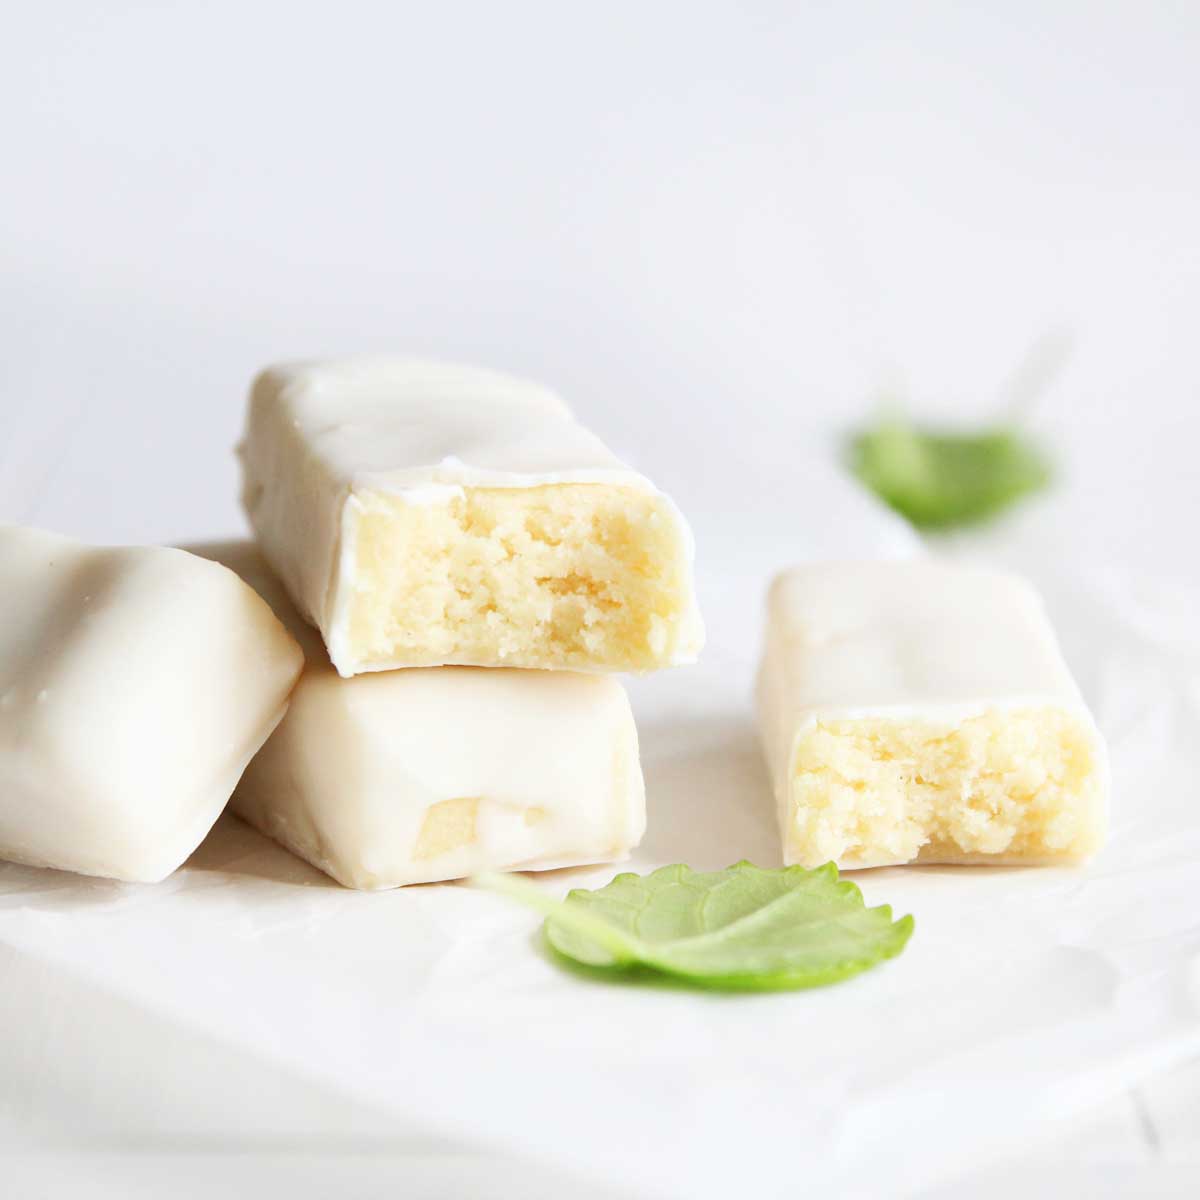 Healthy Homemade Lemon Protein Bars made with Collagen Peptides - birthday cake protein bars